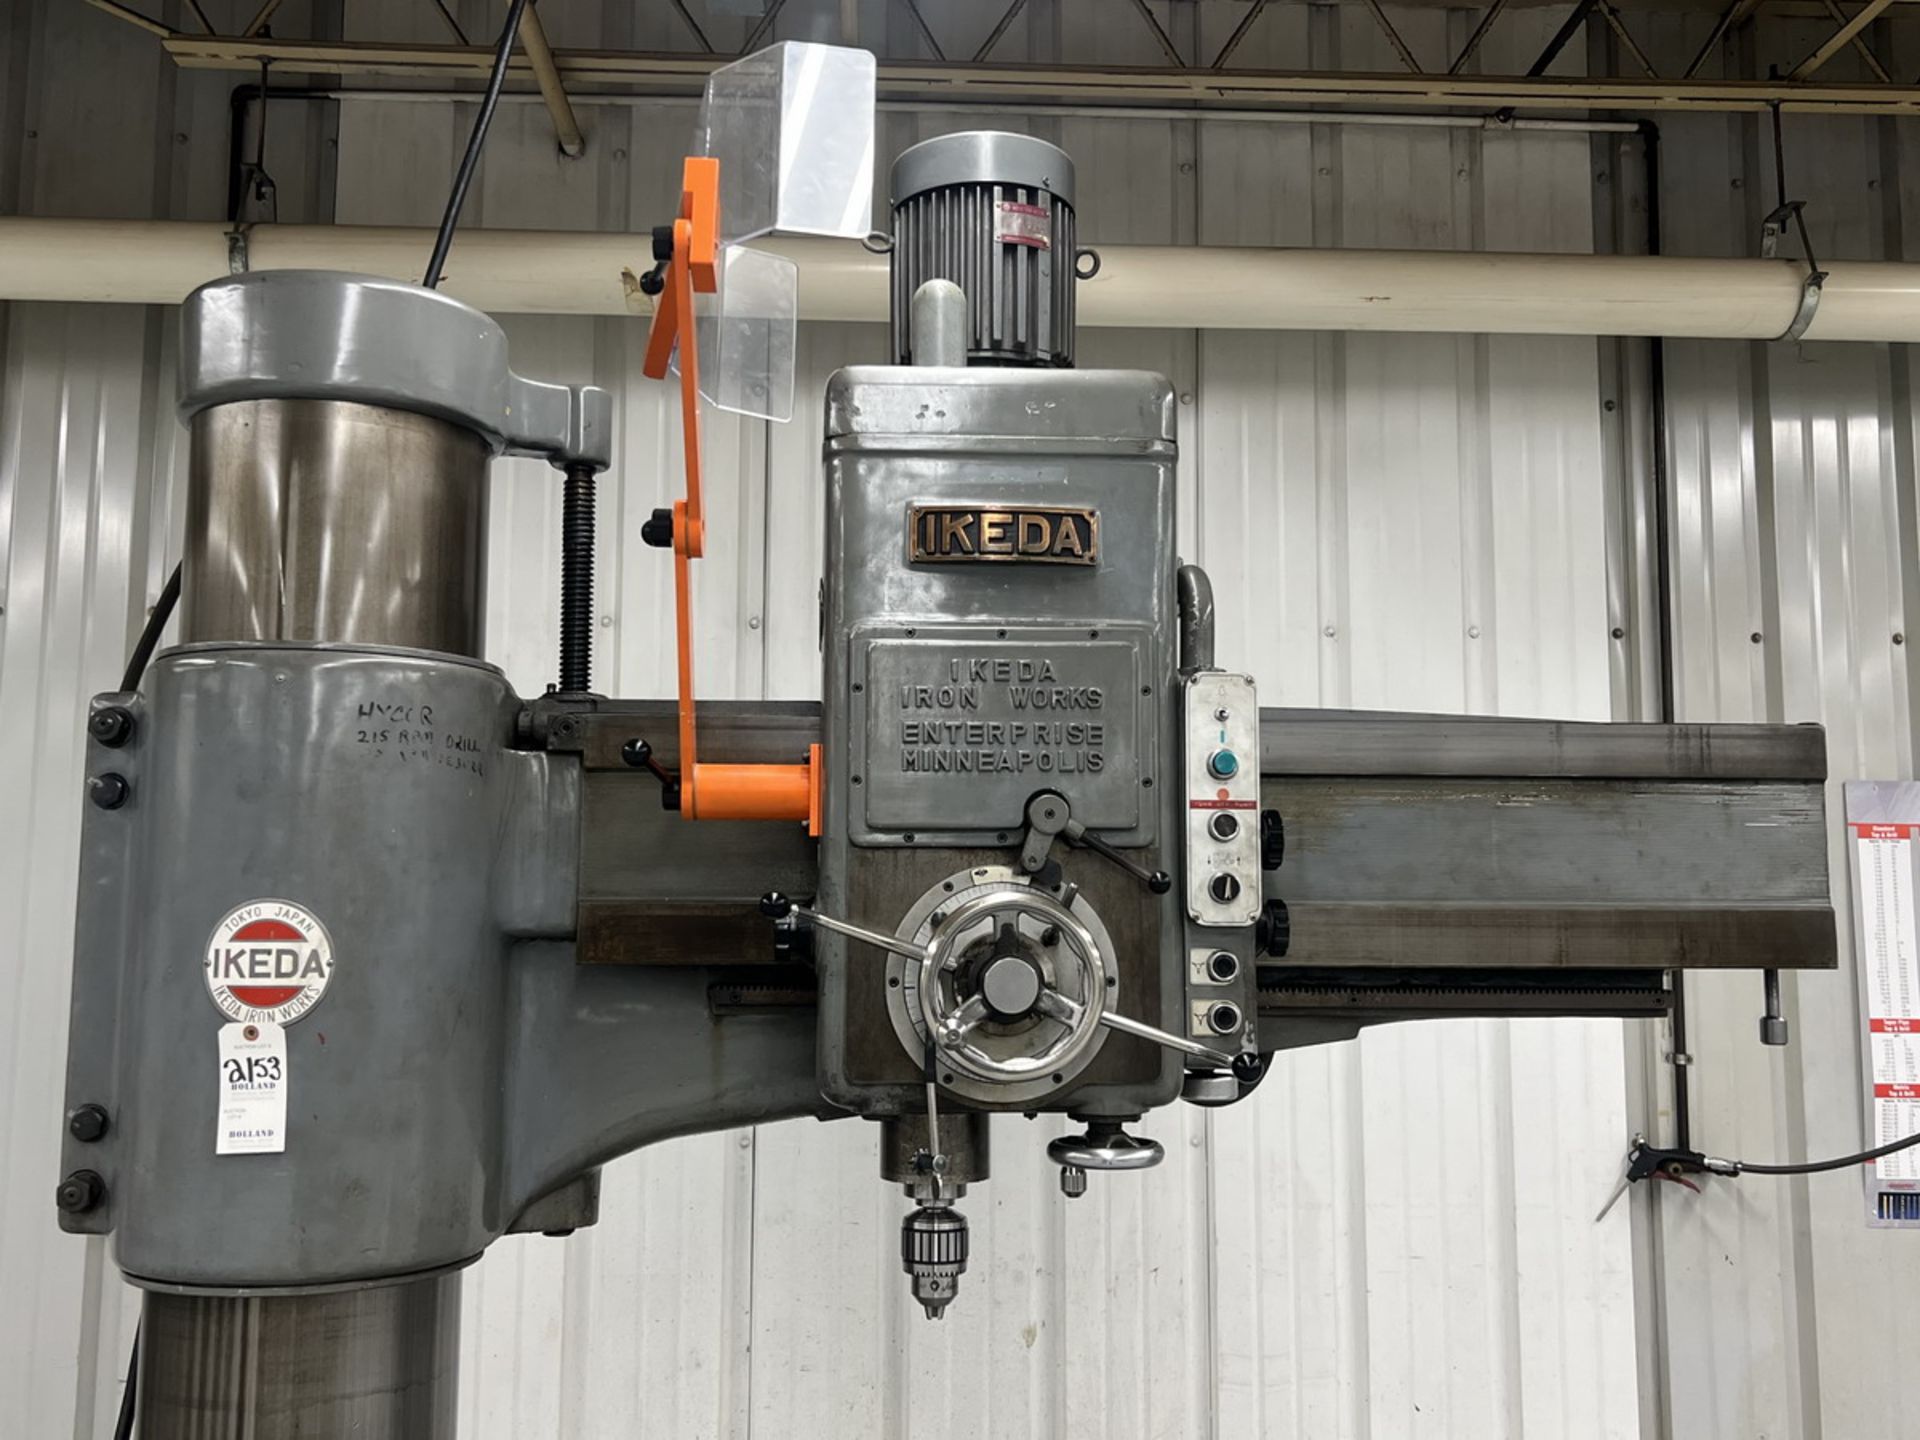 1977 Ikeda Iron Works Type RM1300 Radial Arm Drill - Image 5 of 12